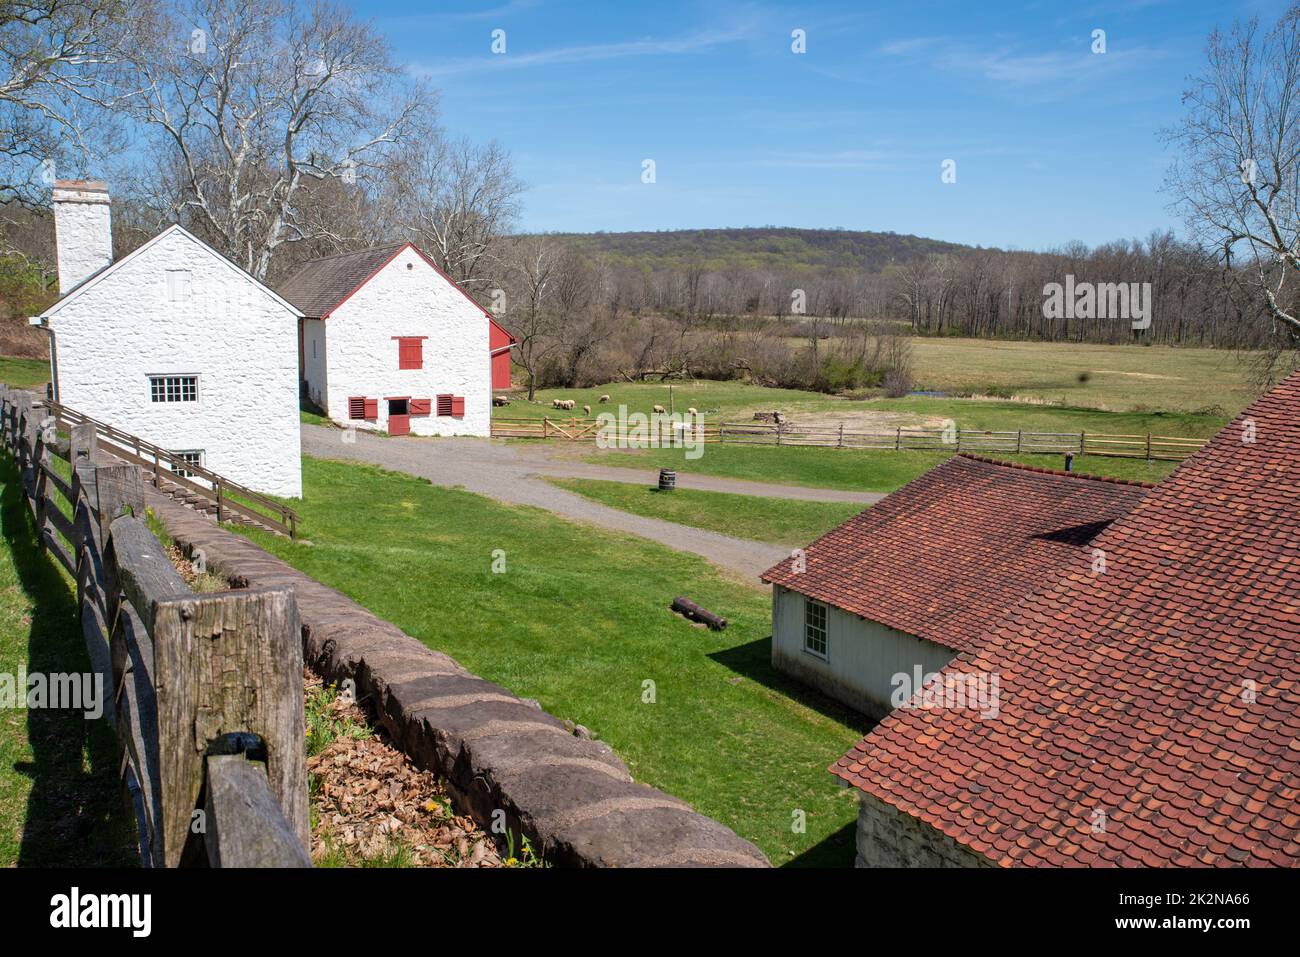 Colonial American rural village landscape with white stone buildings Stock Photo